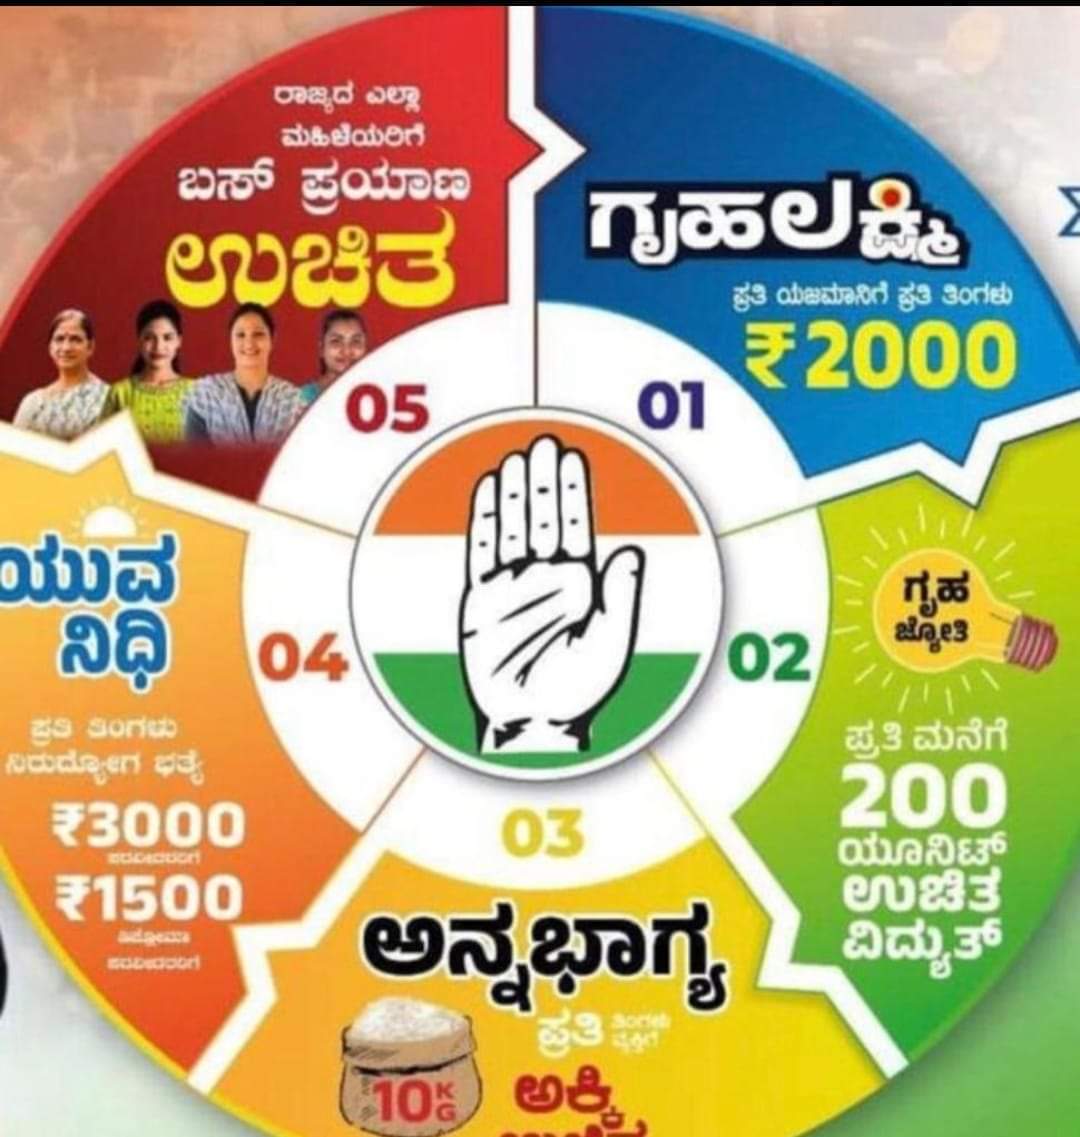 Fed up with the 40% commission government, unemployment, price rise, communal division, the great people of Karnataka will vote to see off the corrupt BJP regime. 

Karnataka will ensure it has a progressive government. 

#KarnatakaWantsCongress
#CongressWinning150